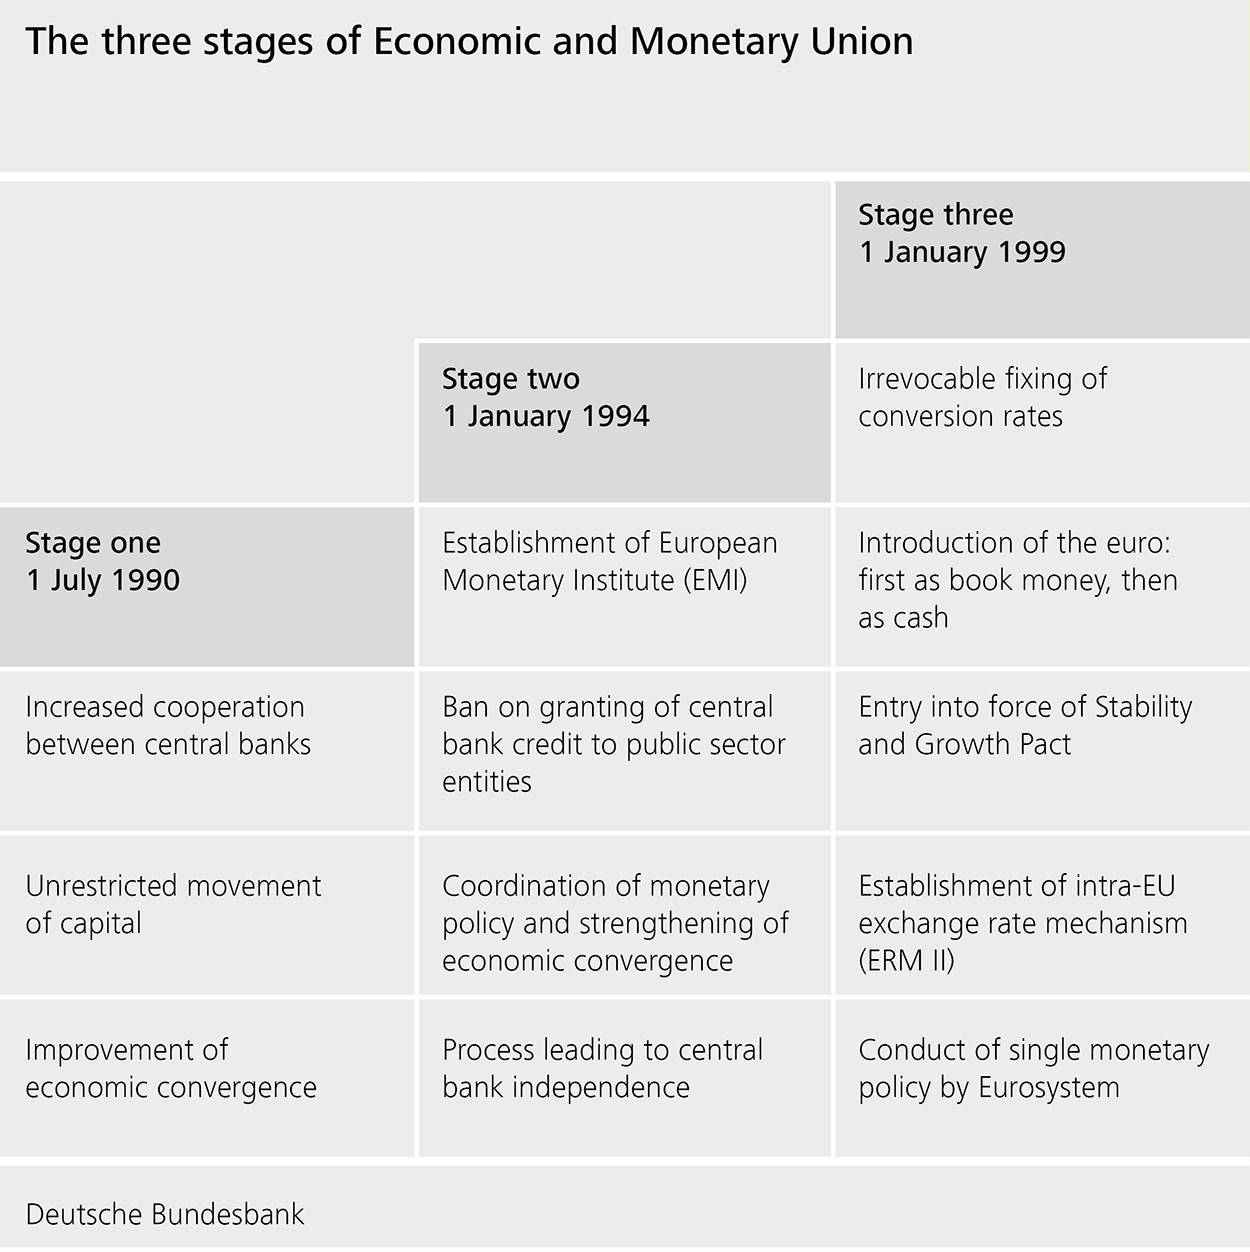 The three stages of economic and monetary union